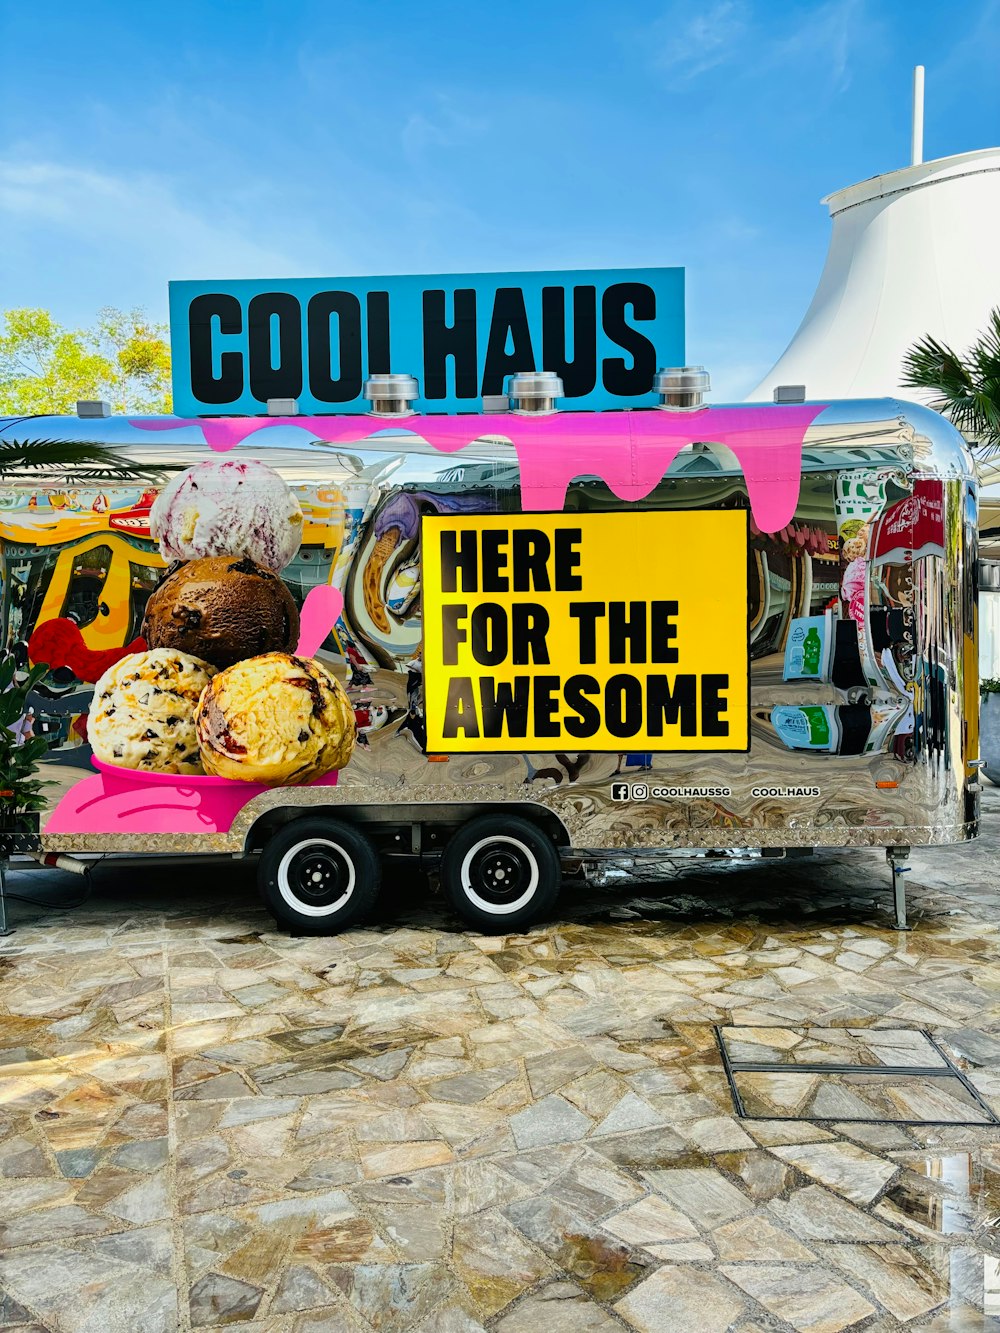 「Cool Haus here for the awesome」と書かれた看板を掲げたフードトラック